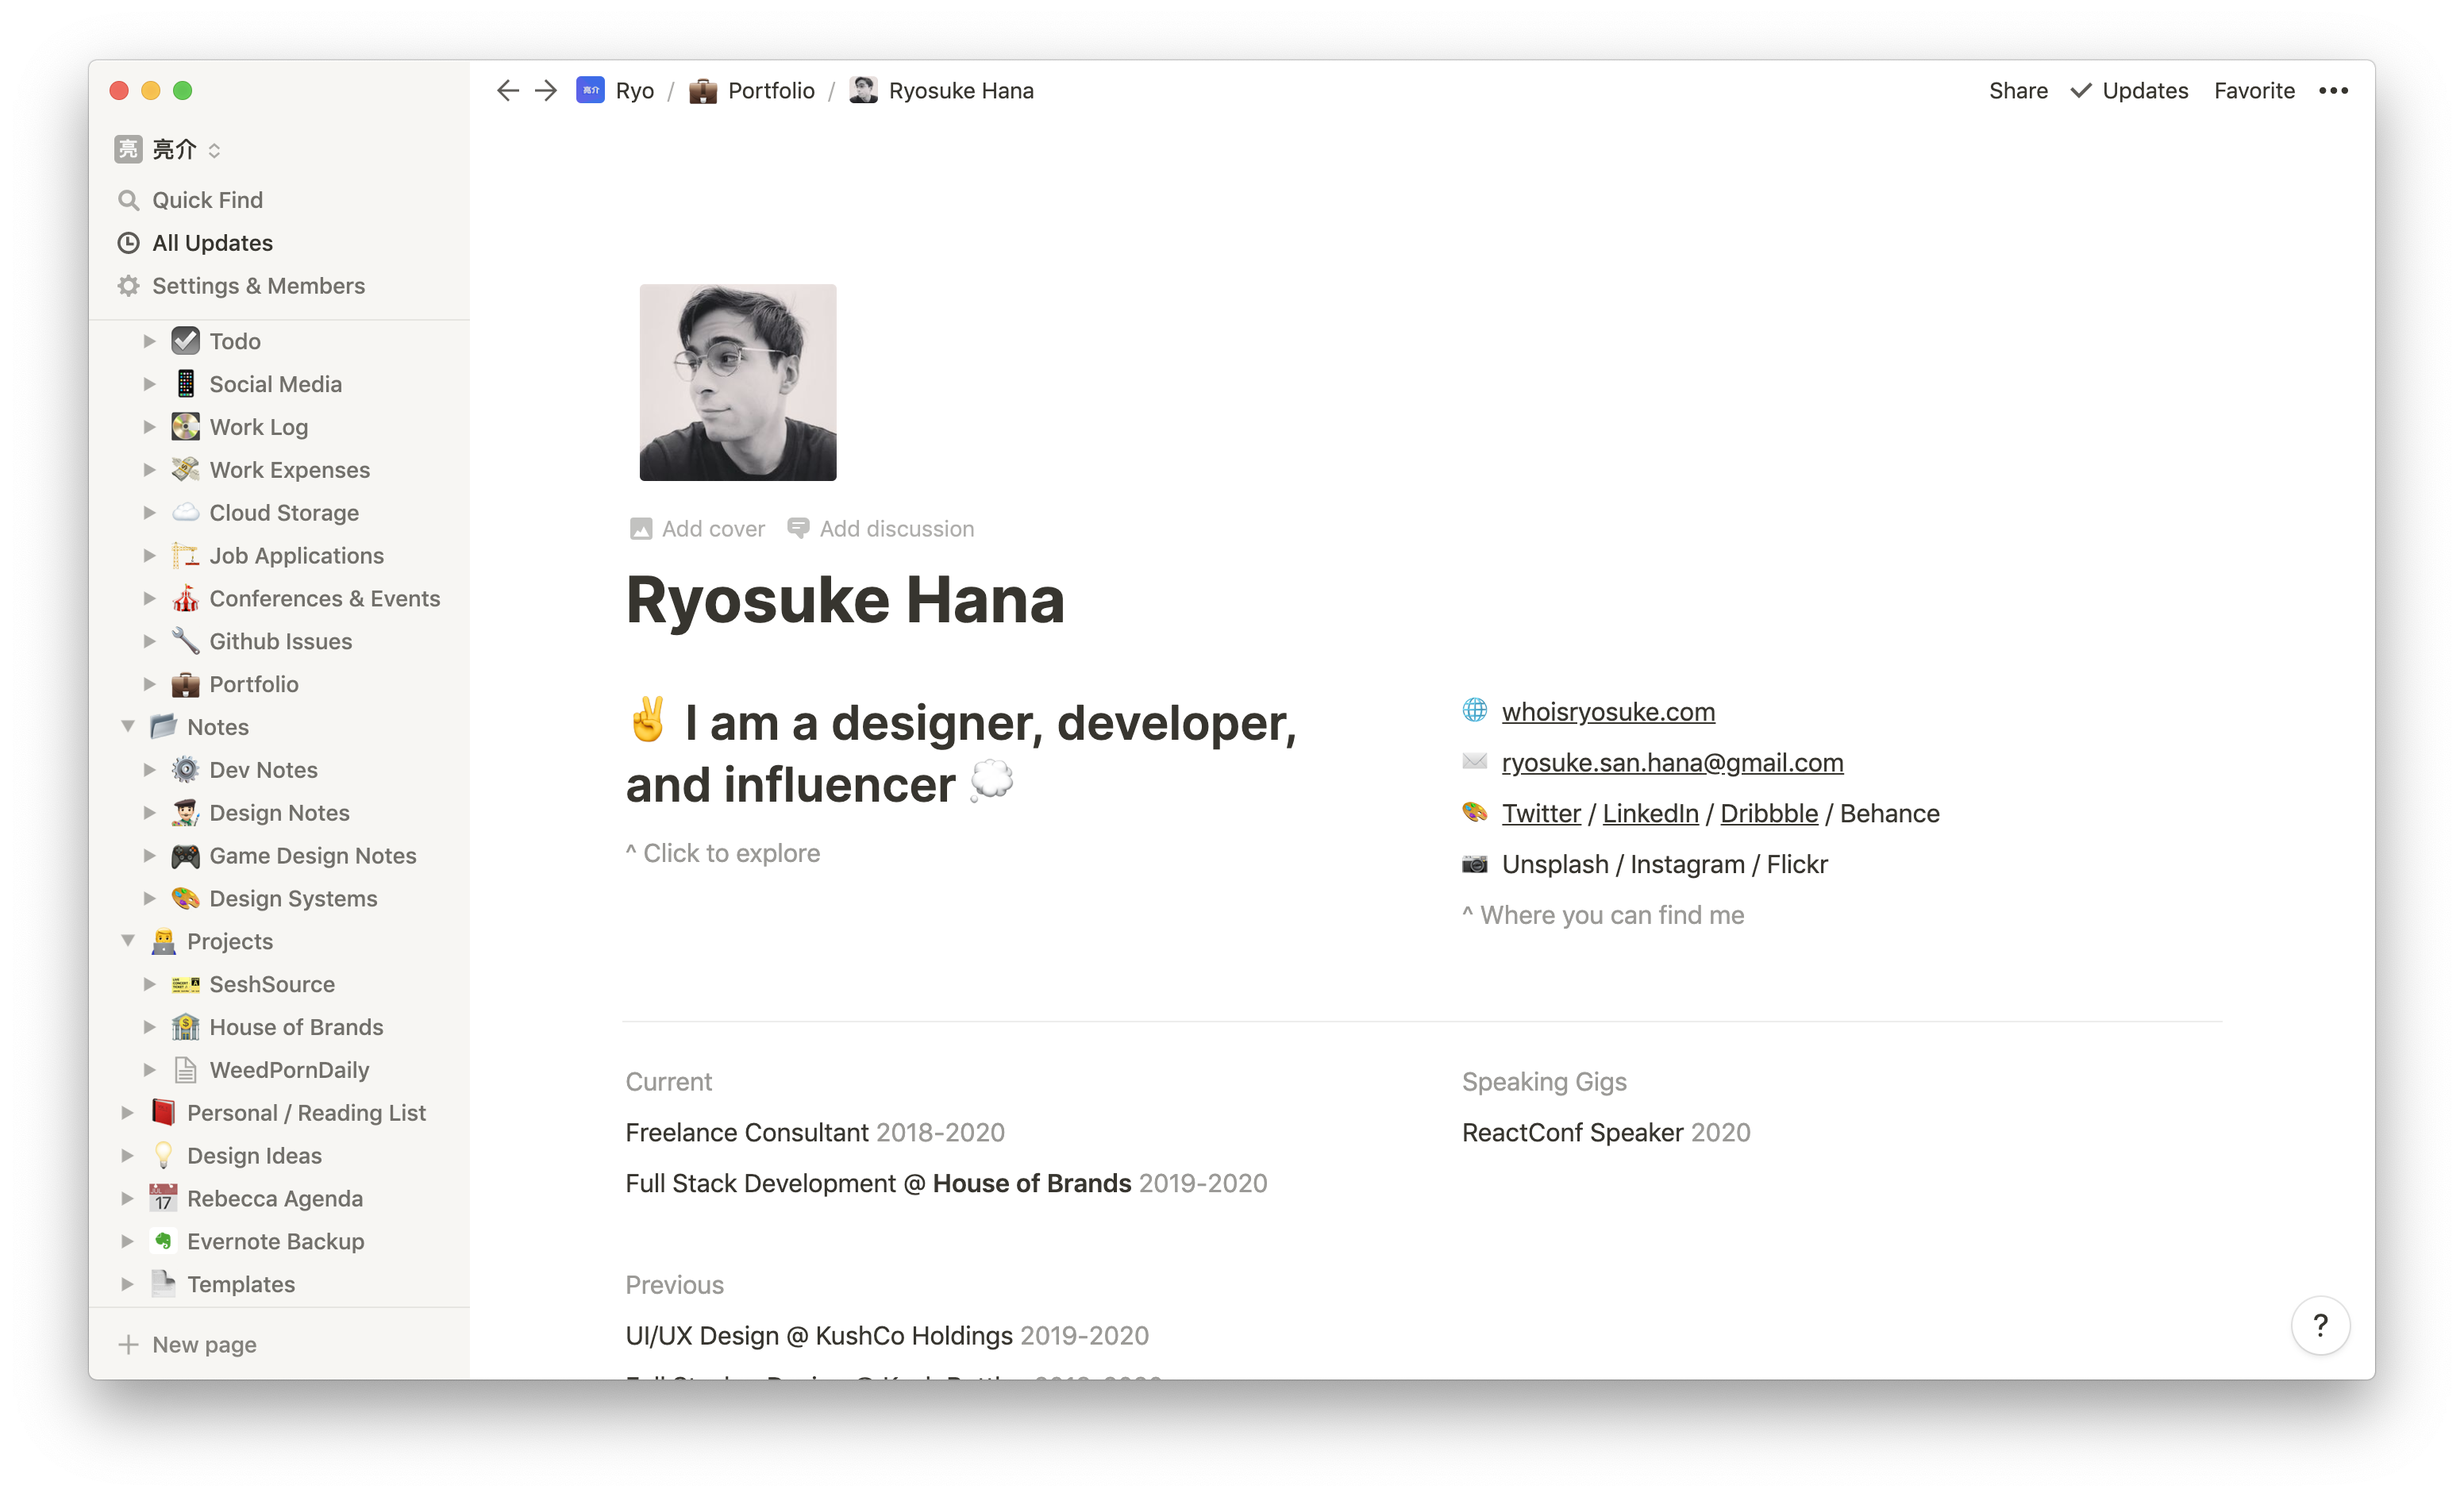 Screenshot of the Notion app on my "CV"-style page showing my info and work history